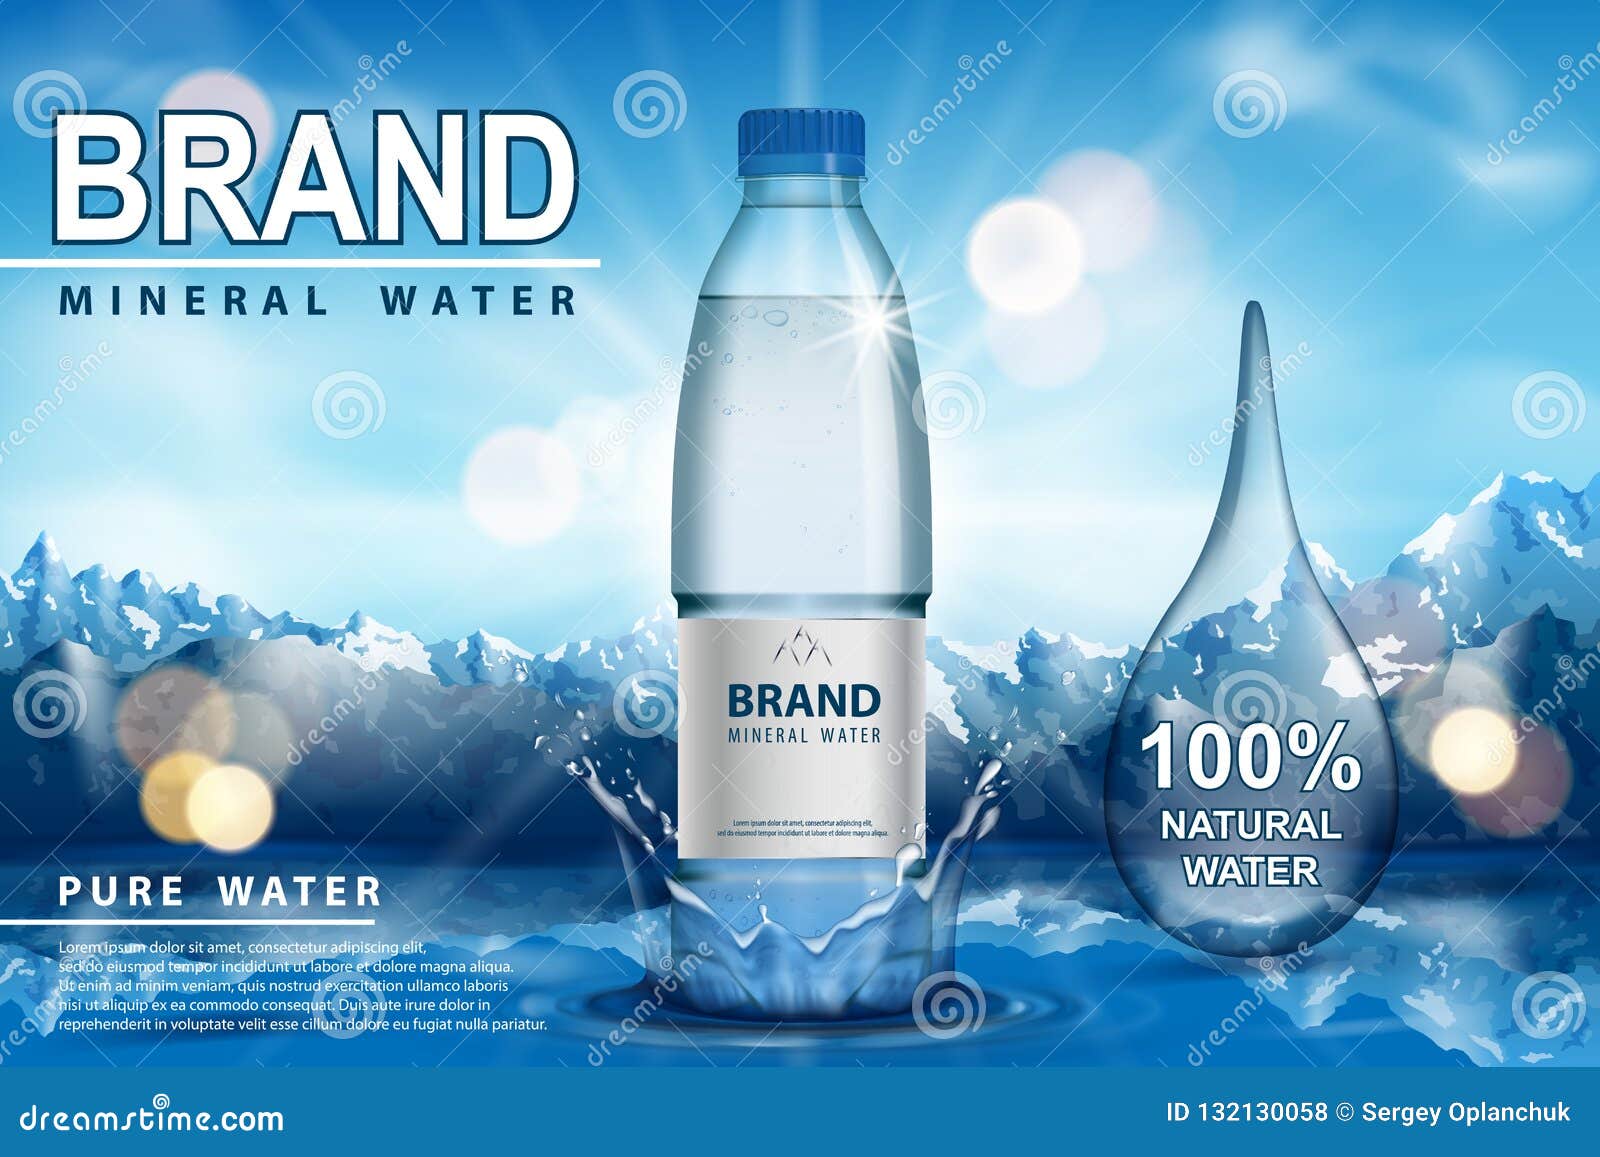 26 Sparkling Water Drops: A Refreshing And Clean Background Featuring ...